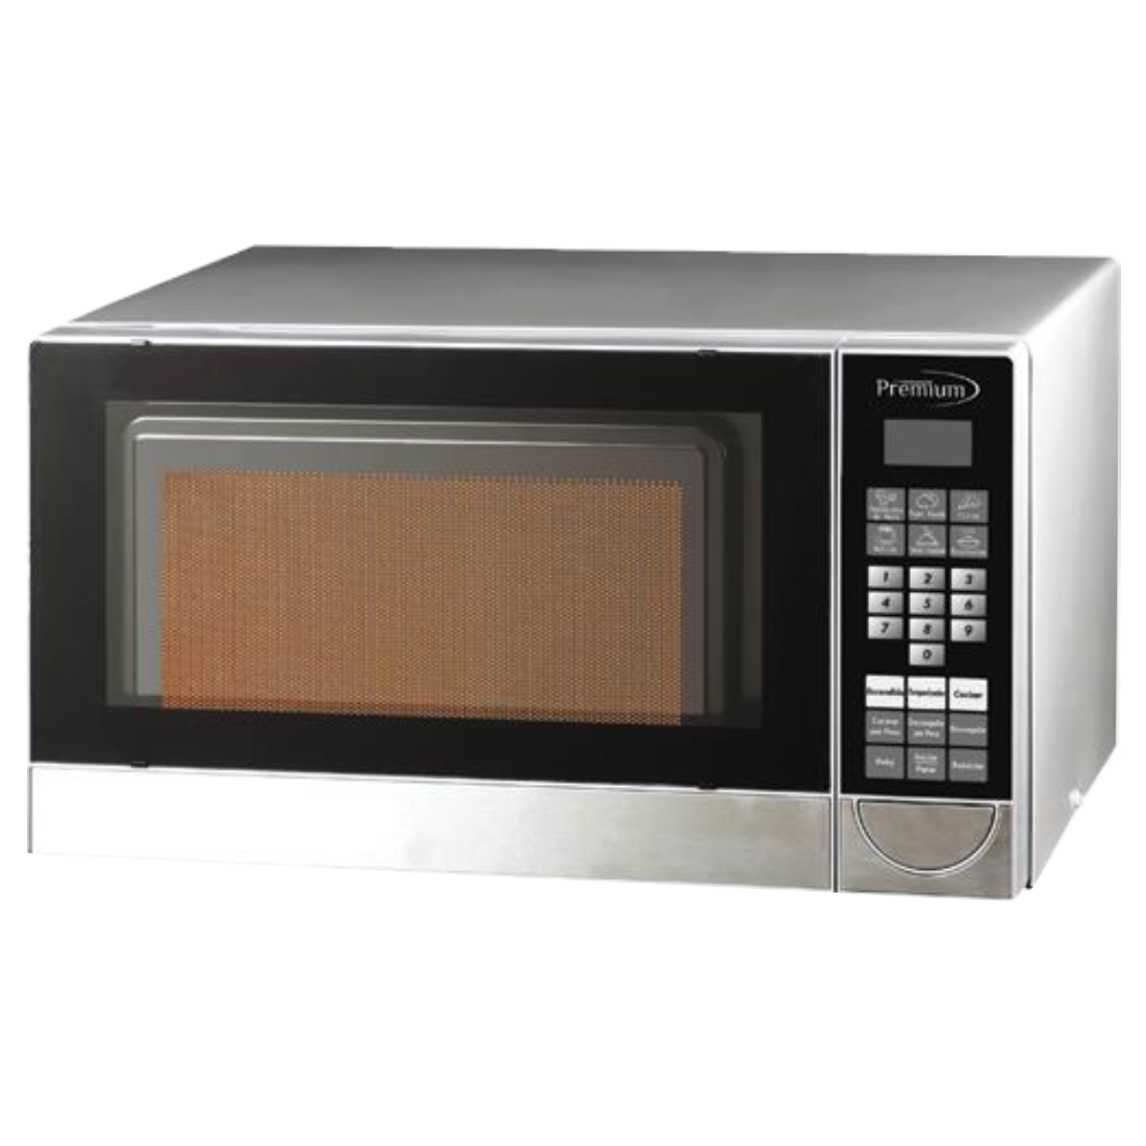 Premium - 0.7 CuFt 700 Microwave Oven Stainless Steel